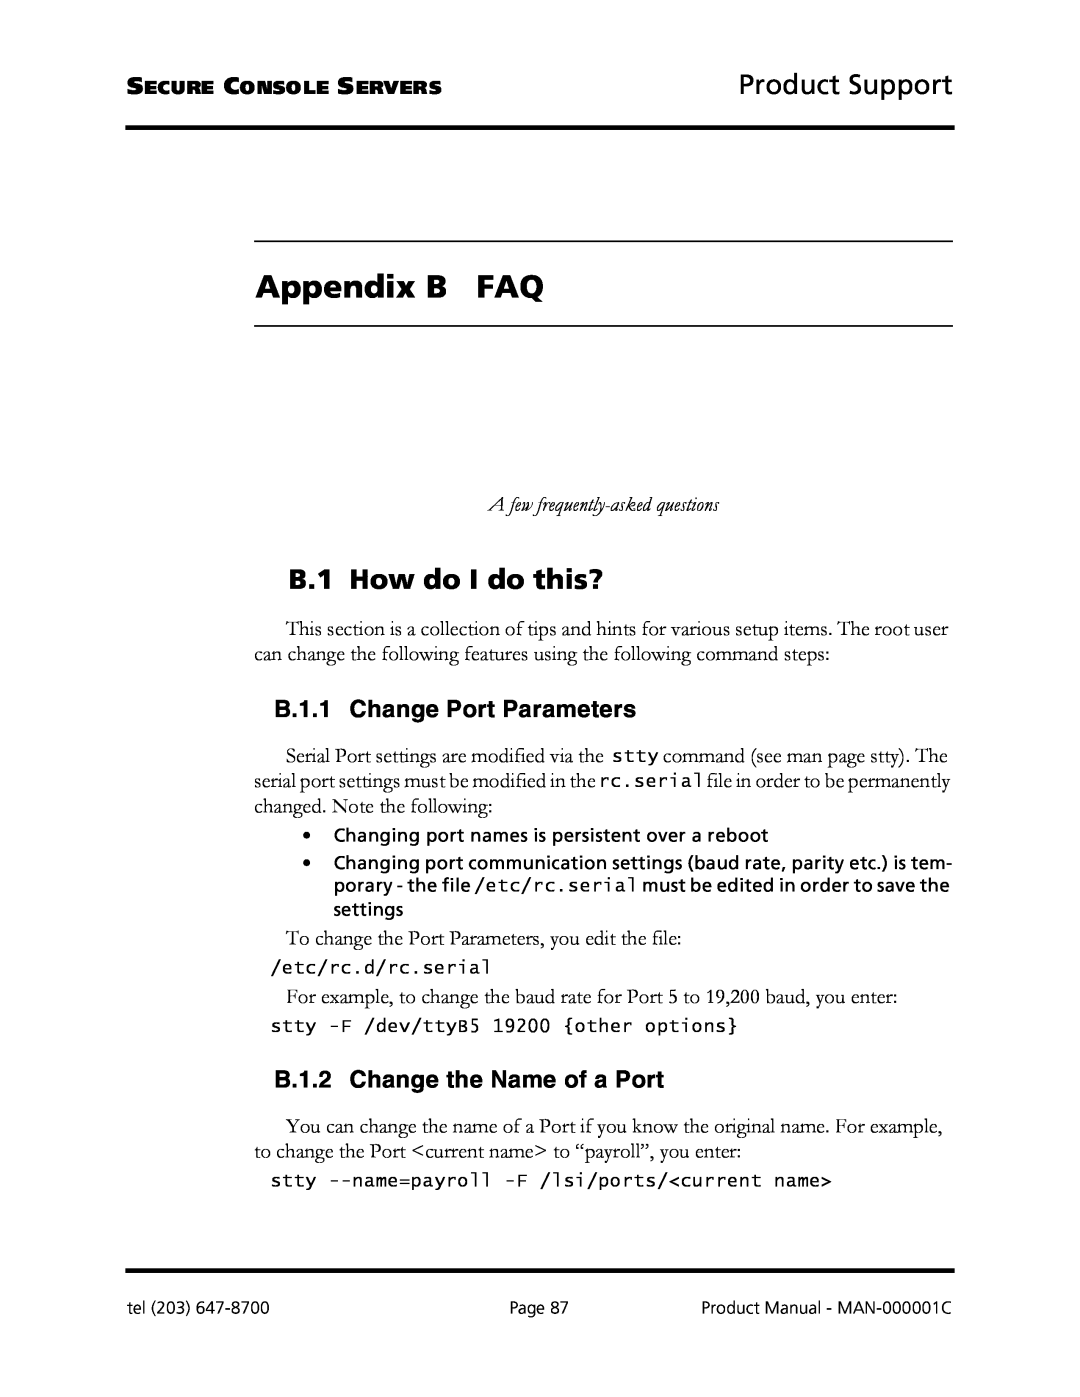 Logical Solutions SCS Appendix B FAQ, B.1 How do I do this?, B.1.1 Change Port Parameters, B.1.2 Change the Name of a Port 